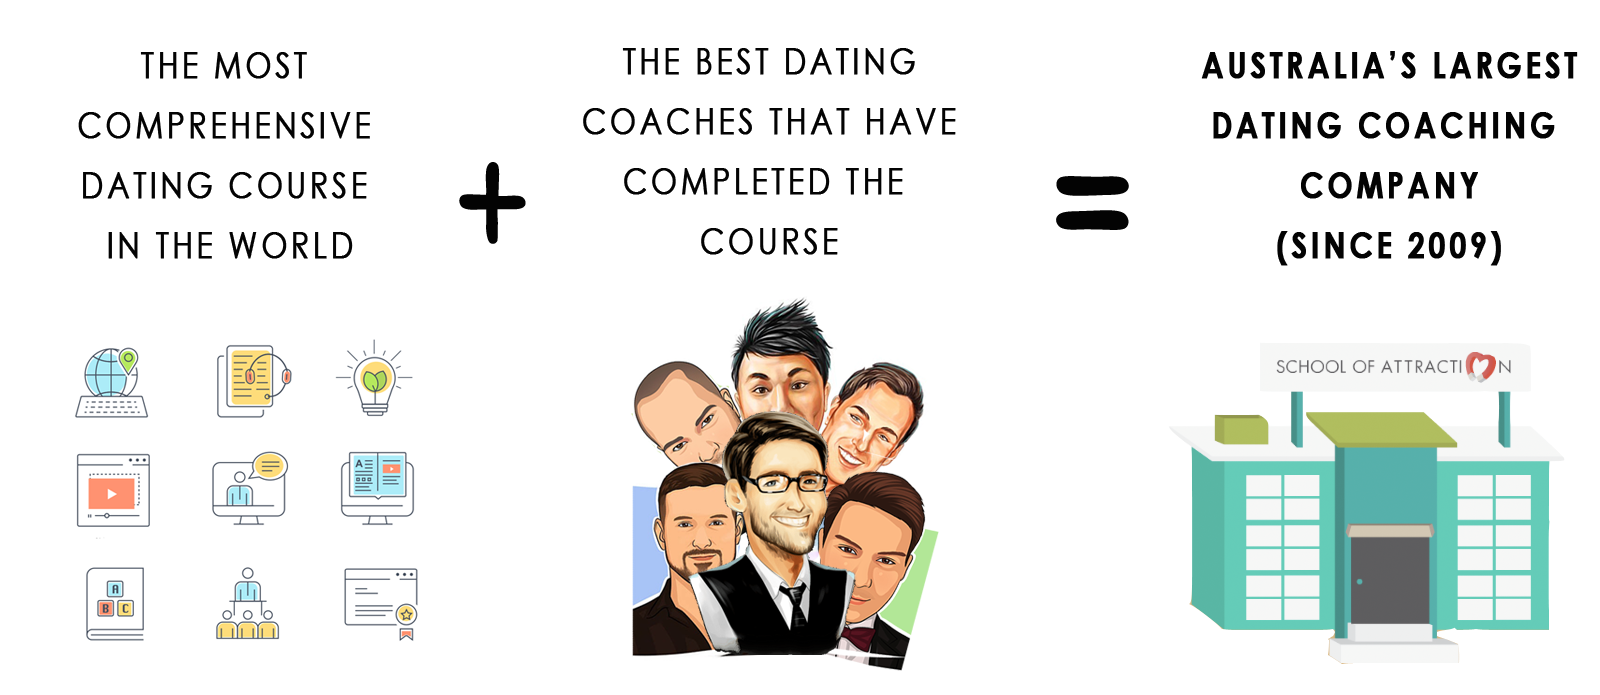 Famous dating coach